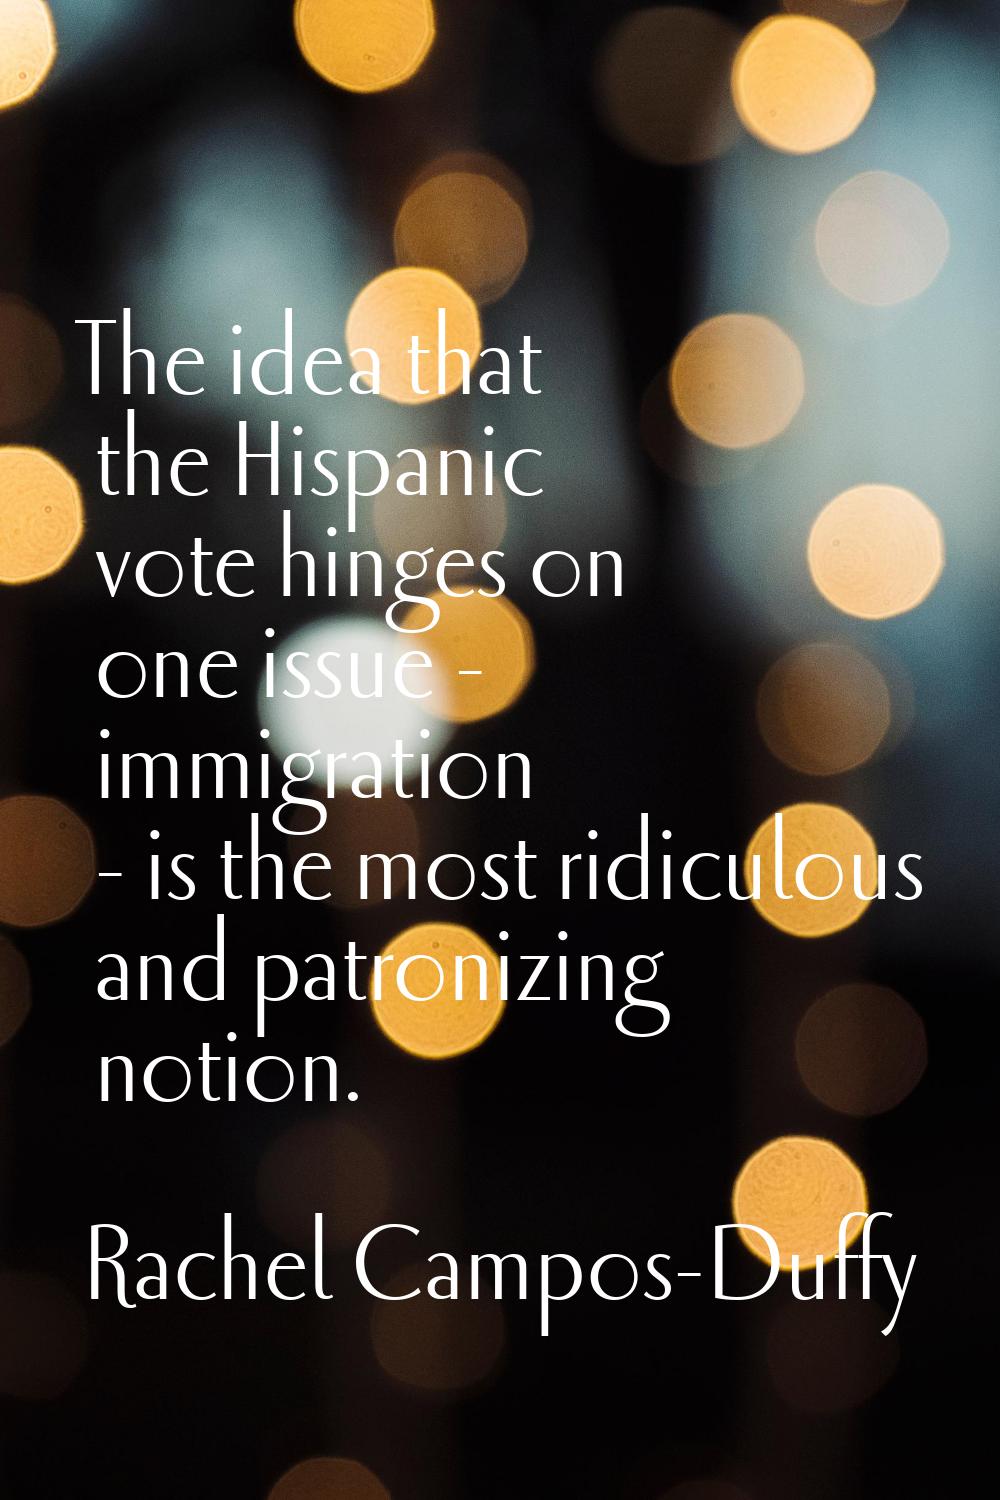 The idea that the Hispanic vote hinges on one issue - immigration - is the most ridiculous and patr